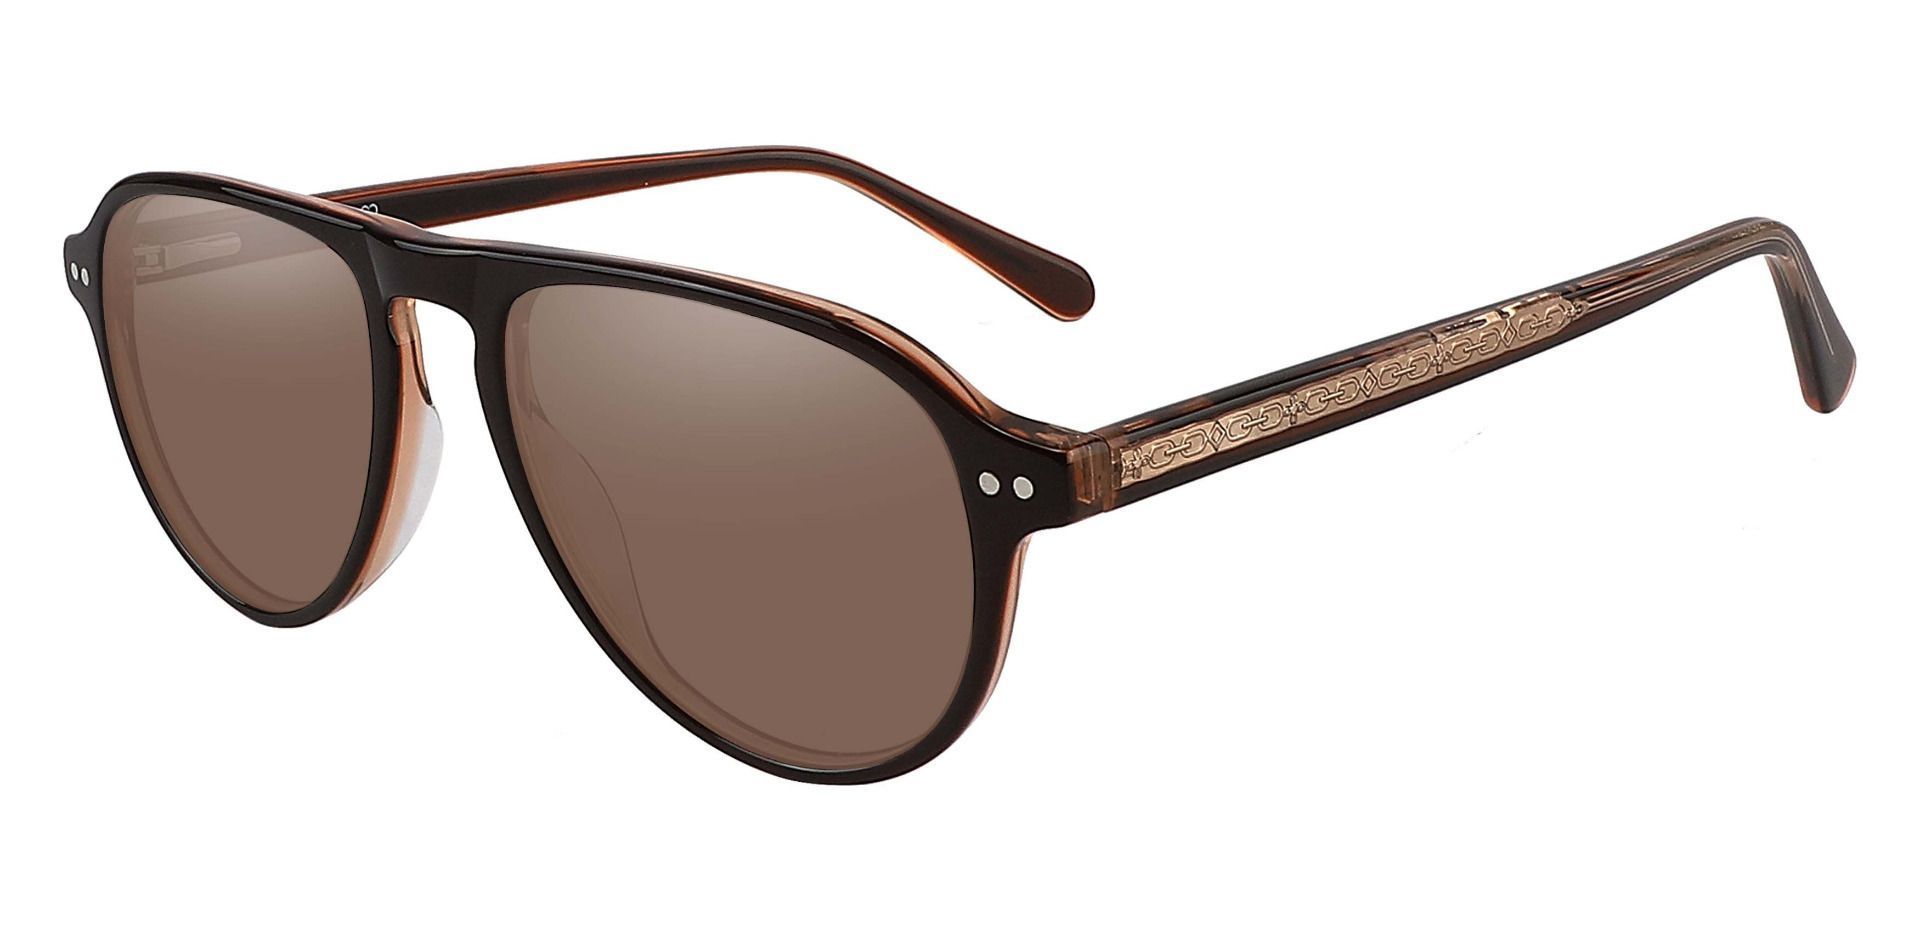 Durham Aviator Reading Sunglasses - Brown Frame With Brown Lenses